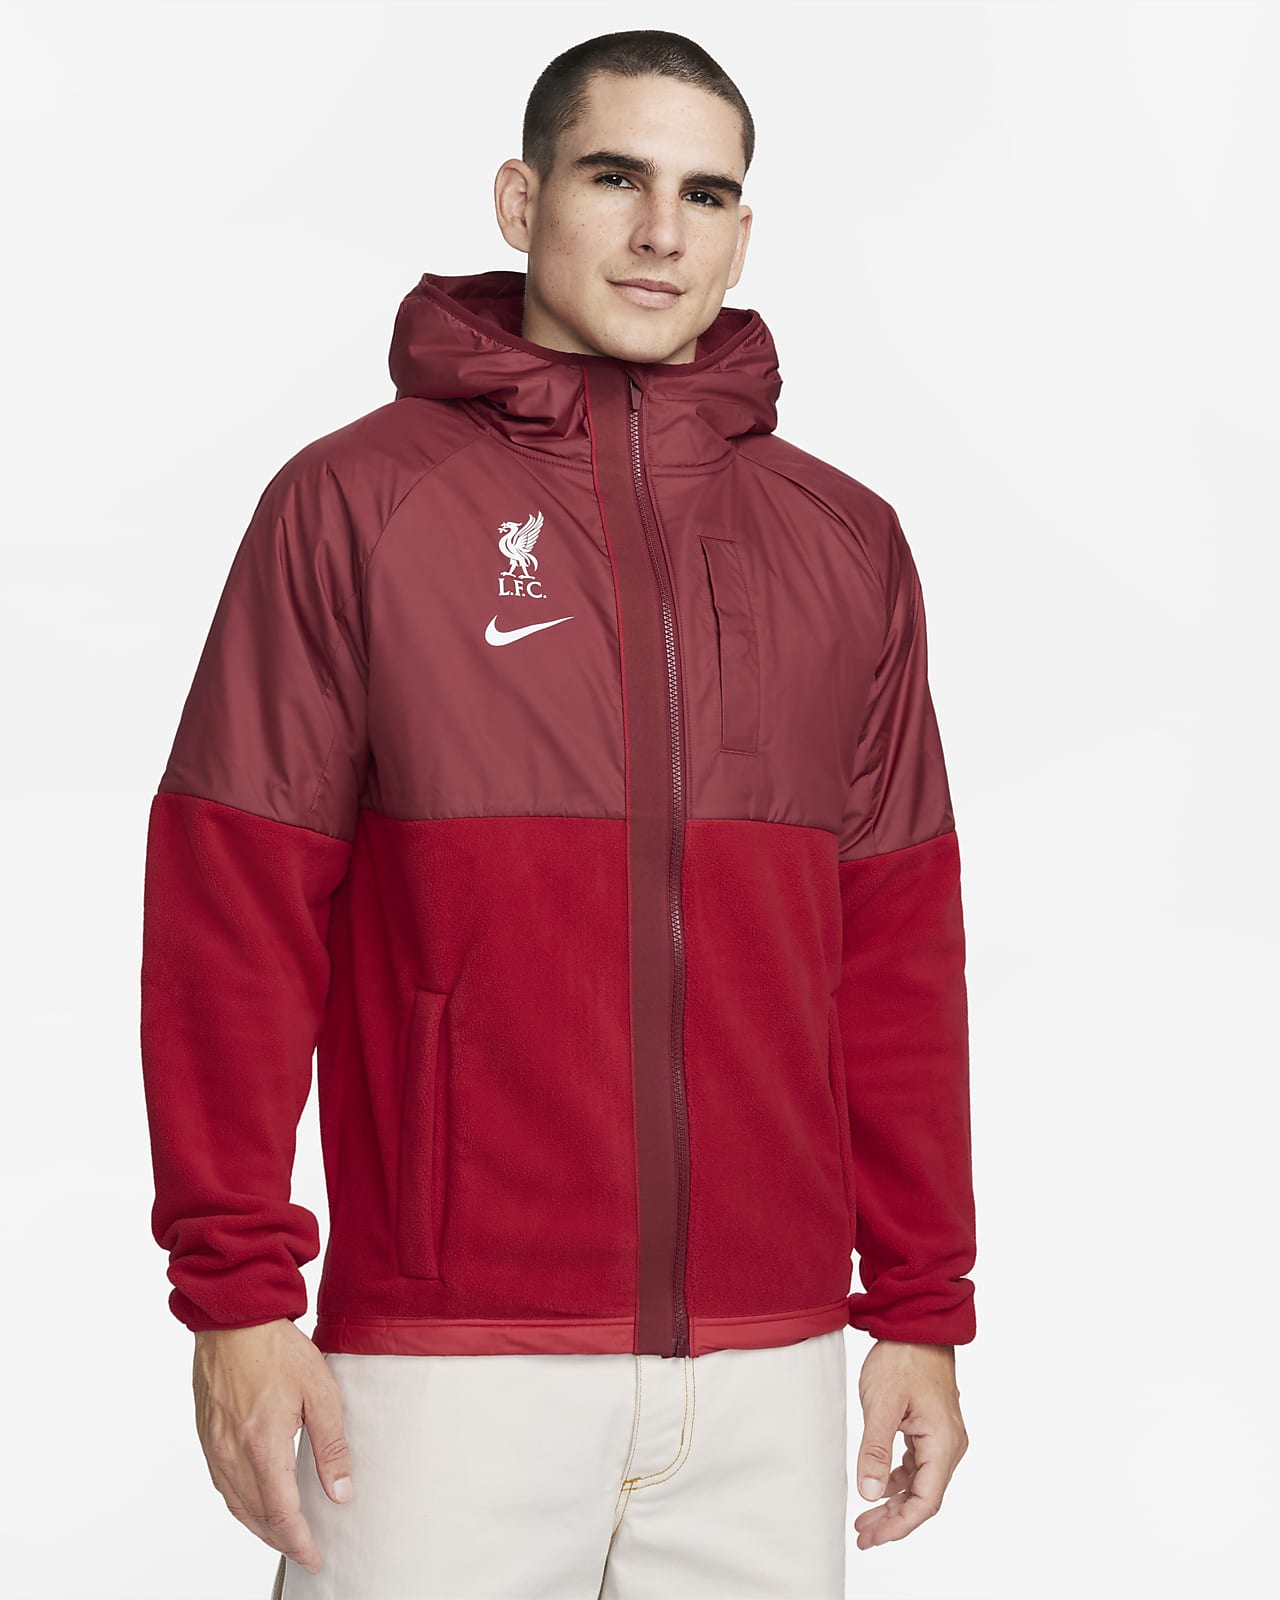 https://static.nike.com/a/images/t_PDP_1280_v1/f_auto,q_auto:eco/f73cd2df-a094-40a5-8bd7-92cb82f12388/liverpool-fc-awf-mens-soccer-winterized-jacket-mWfP5k.png